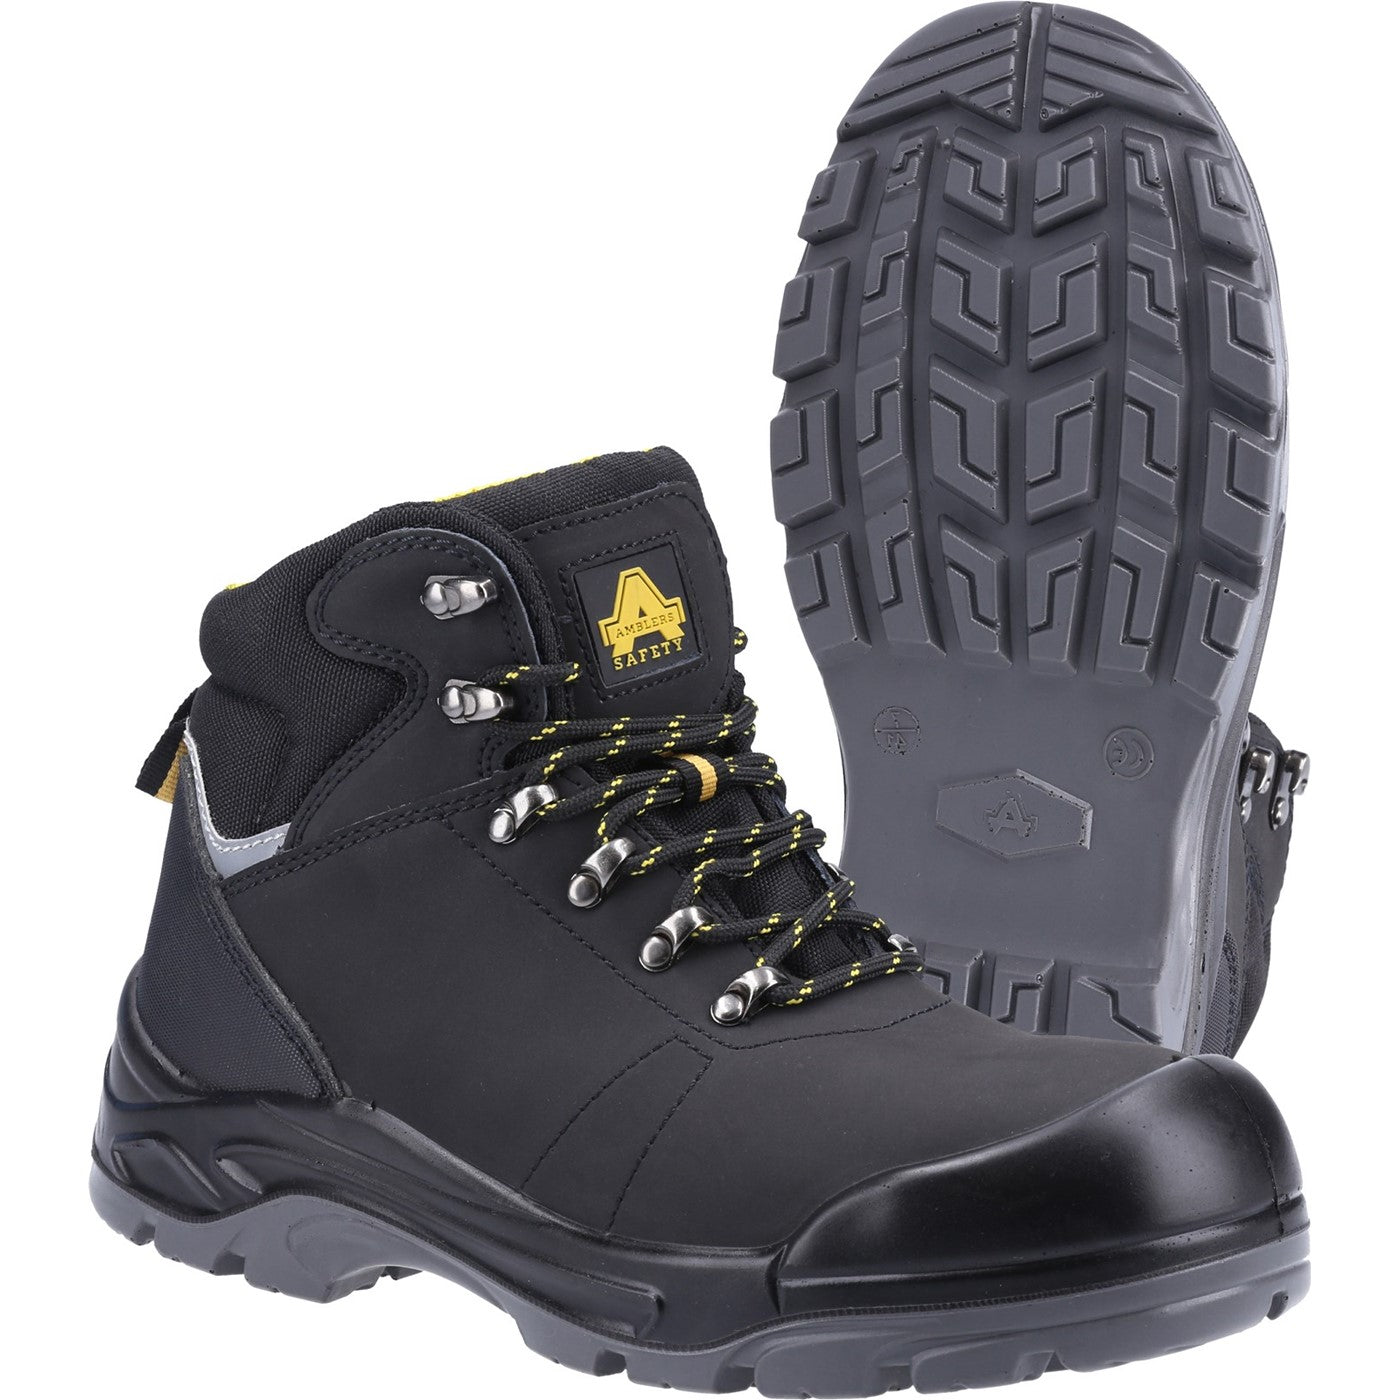 Unisex Amblers Safety AS252 Lightweight Water Resistant Leather Safety Boot